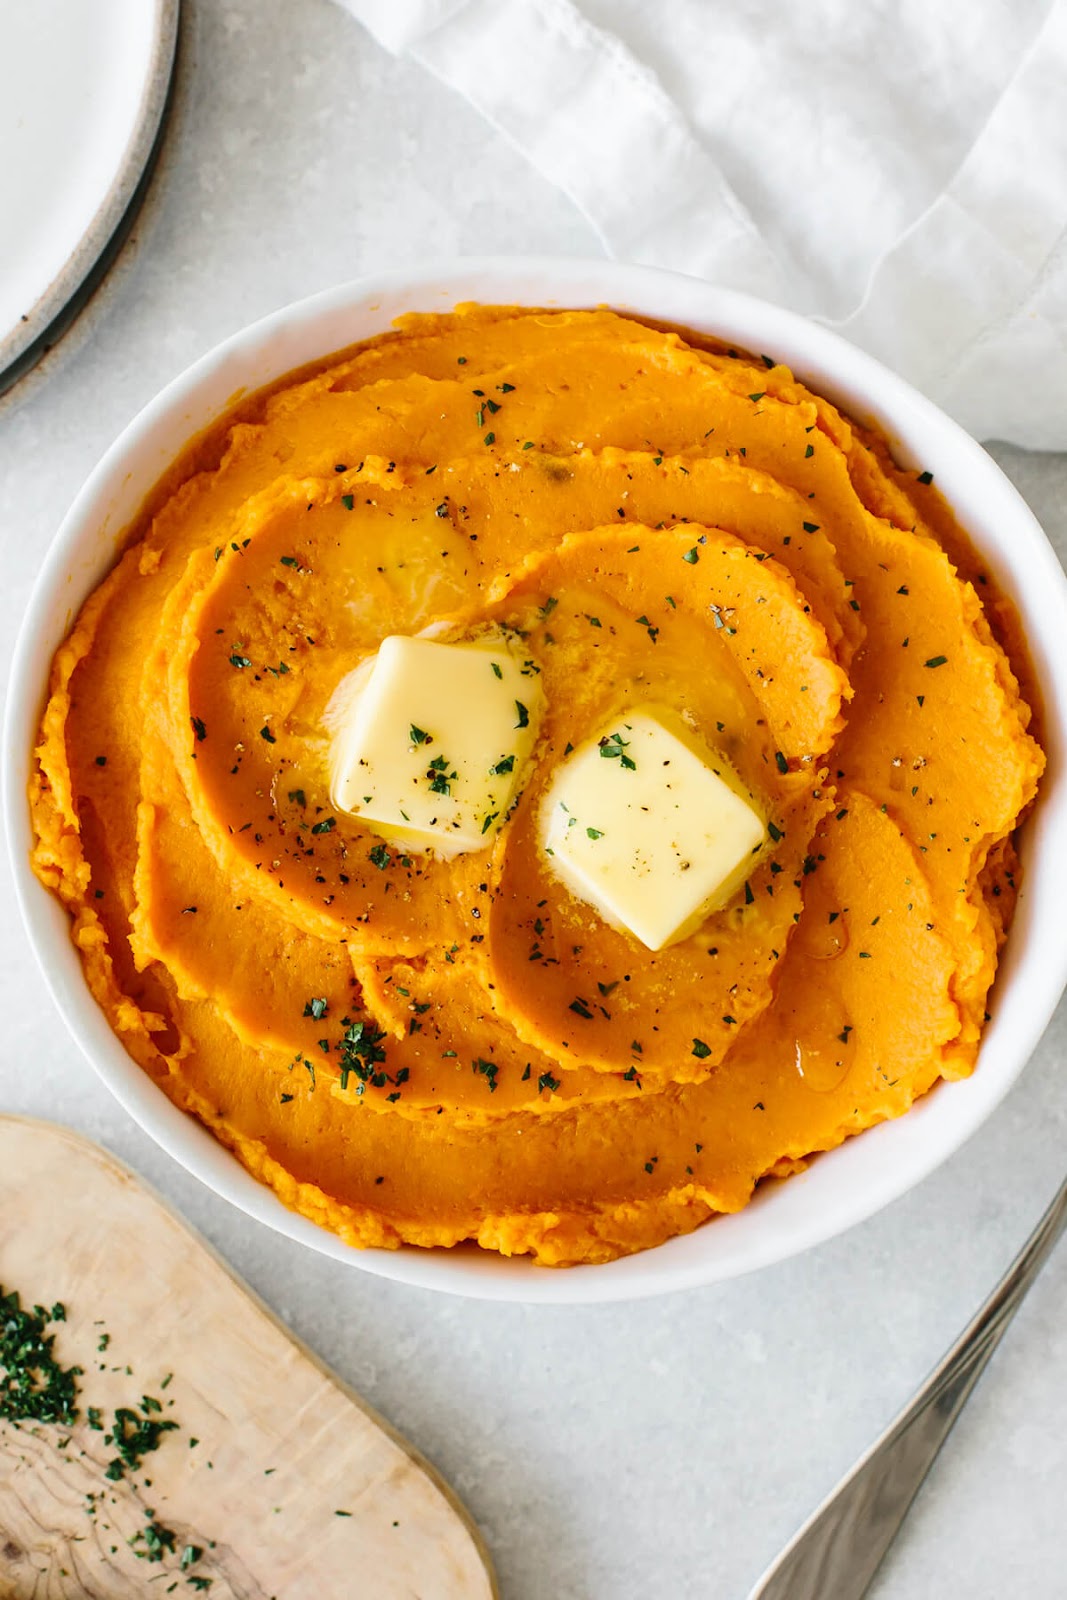 Mashed sweet potatoes topped with butter.